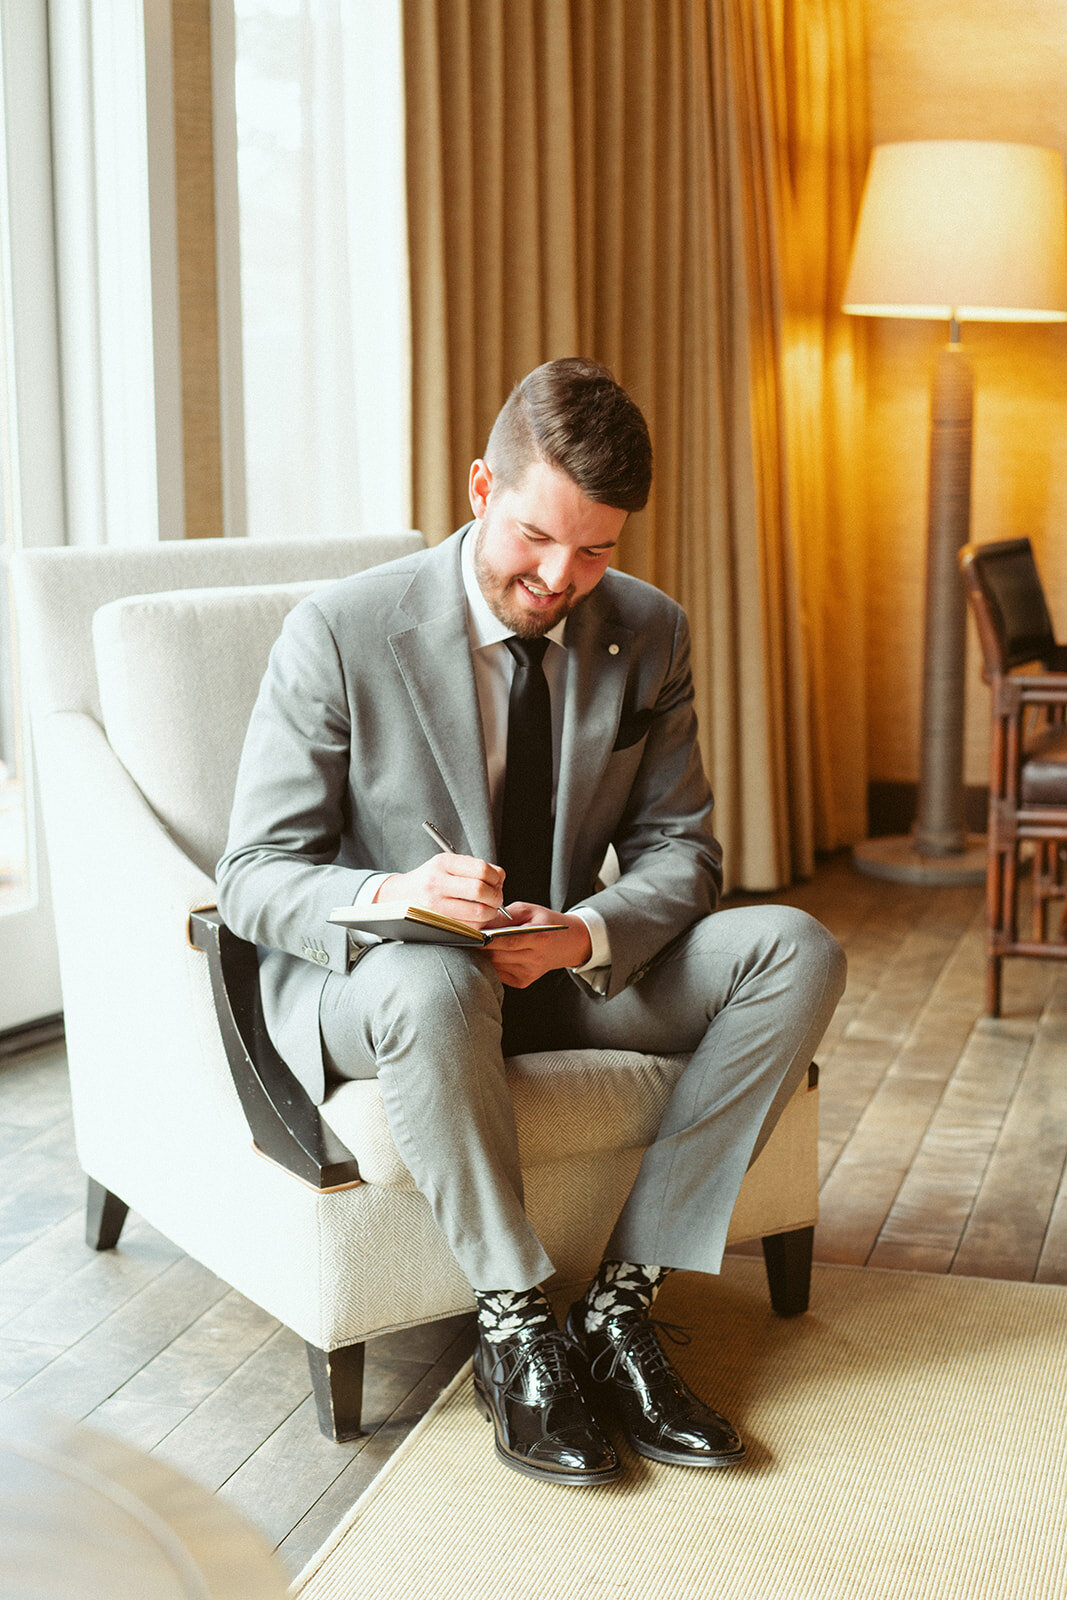 Groom writing a letter to his bride.